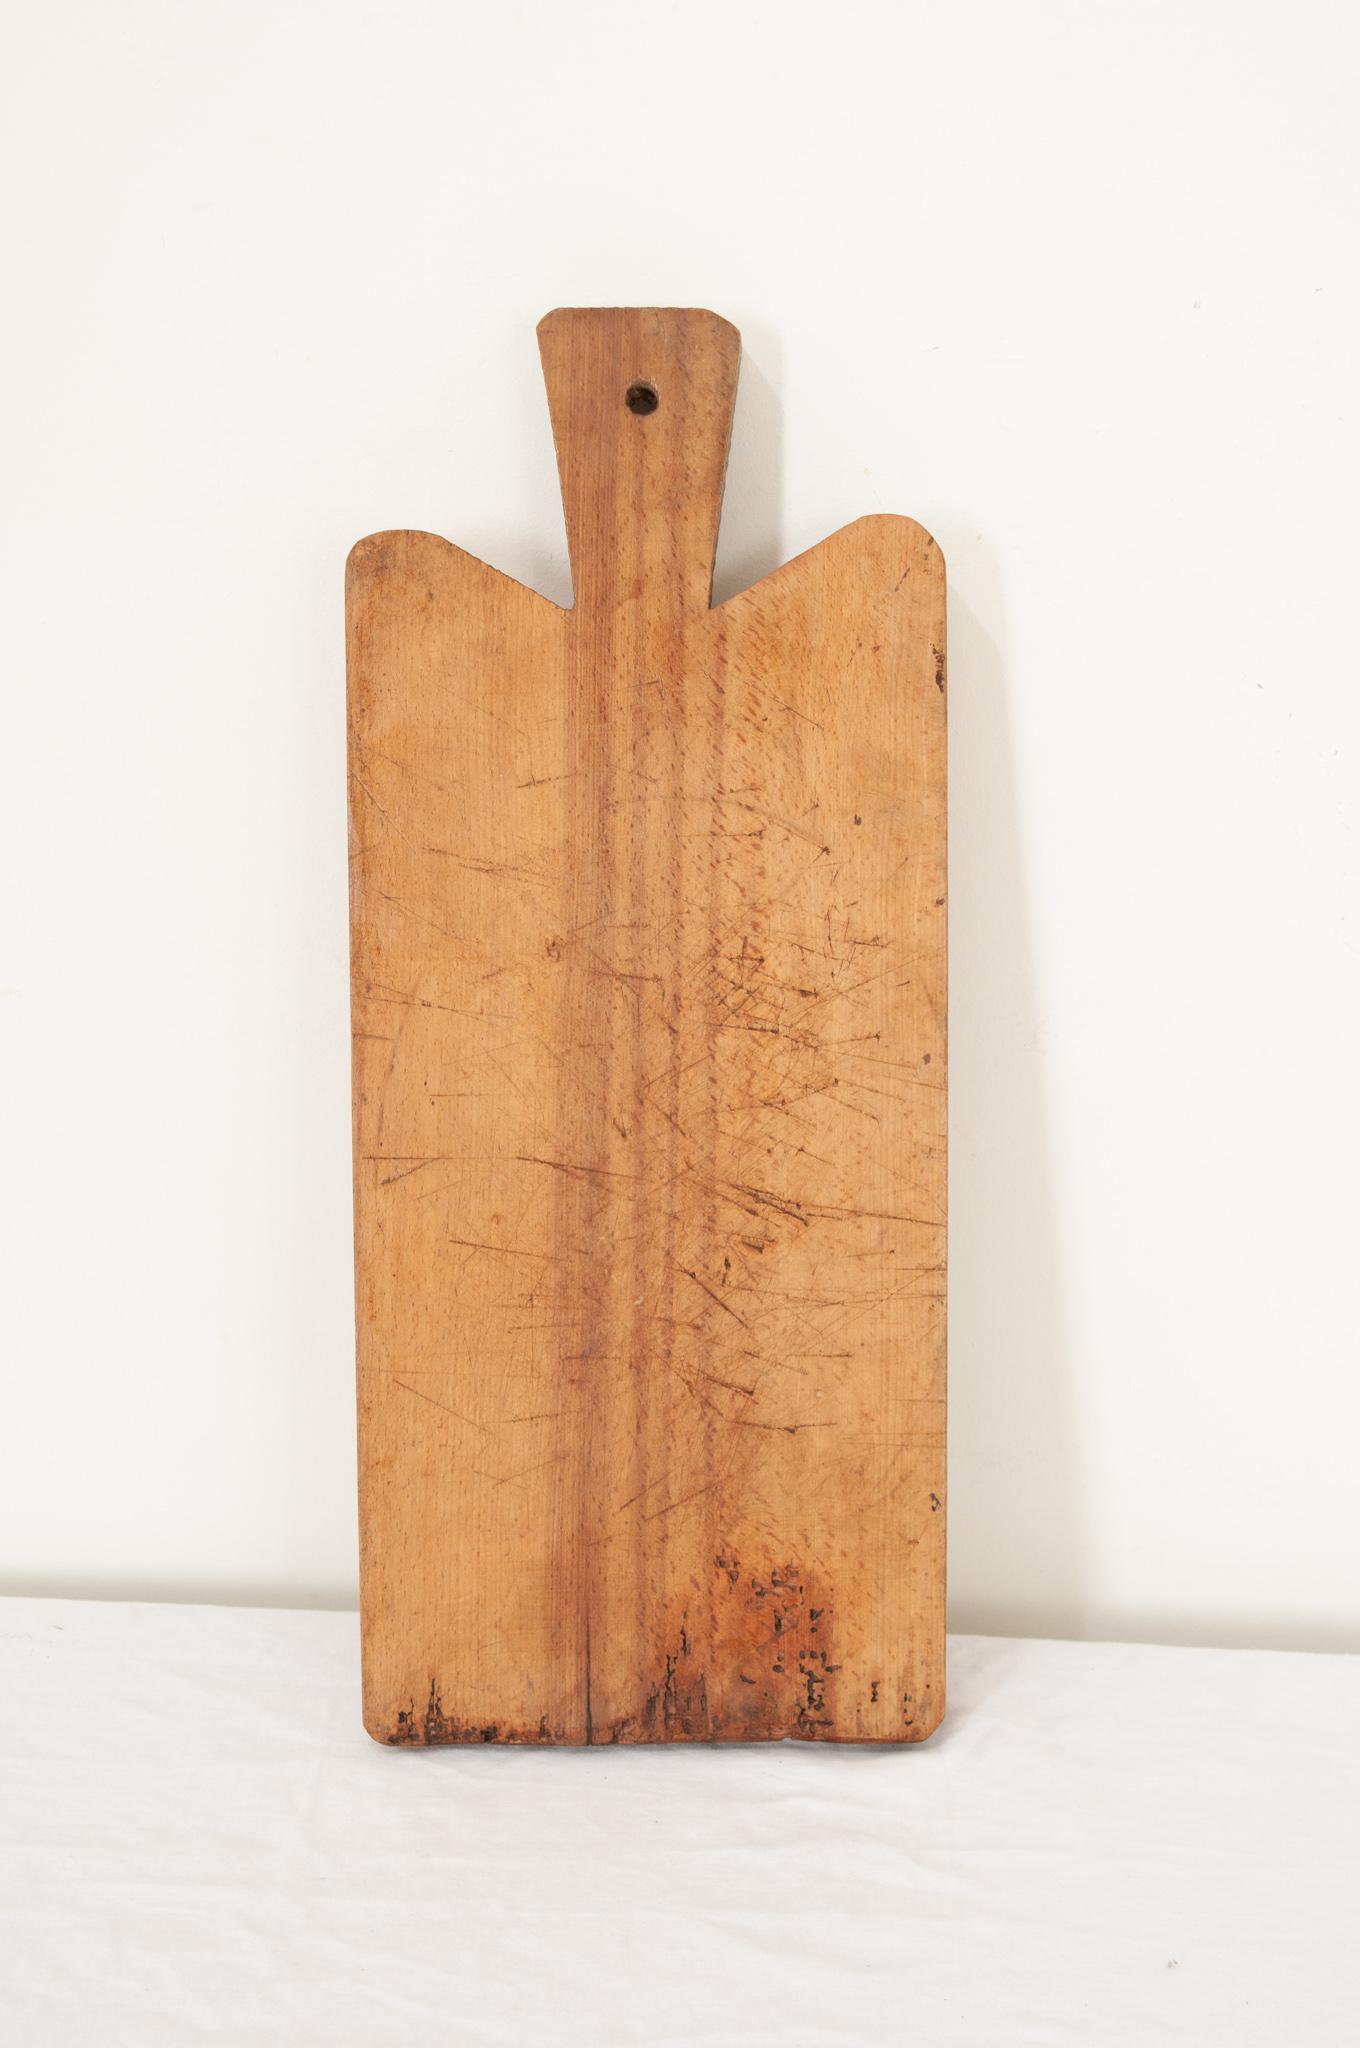 A solid wood cutting board from France in a rectangle shape with smooth corners and a handle. The worn board is made of a single piece of wood that now has a most excellent patina. Knife marks and scrapes that were left by cooks, now long gone, can